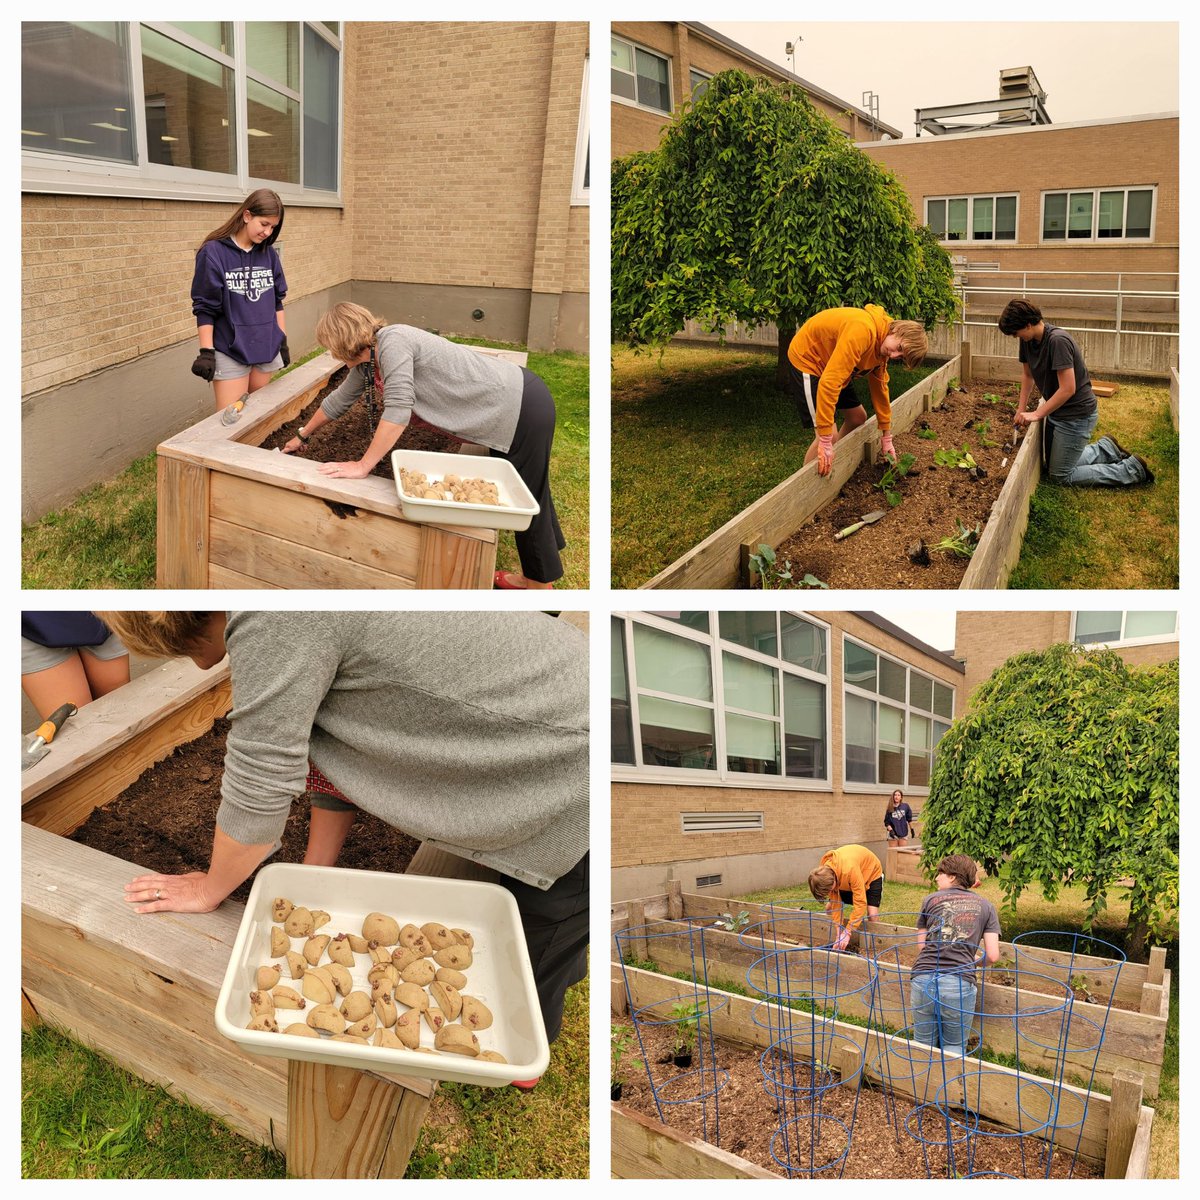 Planting our Mynderse Gardens! This year, we added POTATOES into one of our New planter boxes. Carrots going into the other one...STAY TUNED!! #SFCSDPROUD @SenecaFallsCSD @CCESeneca @farm2school #Farmtoschool